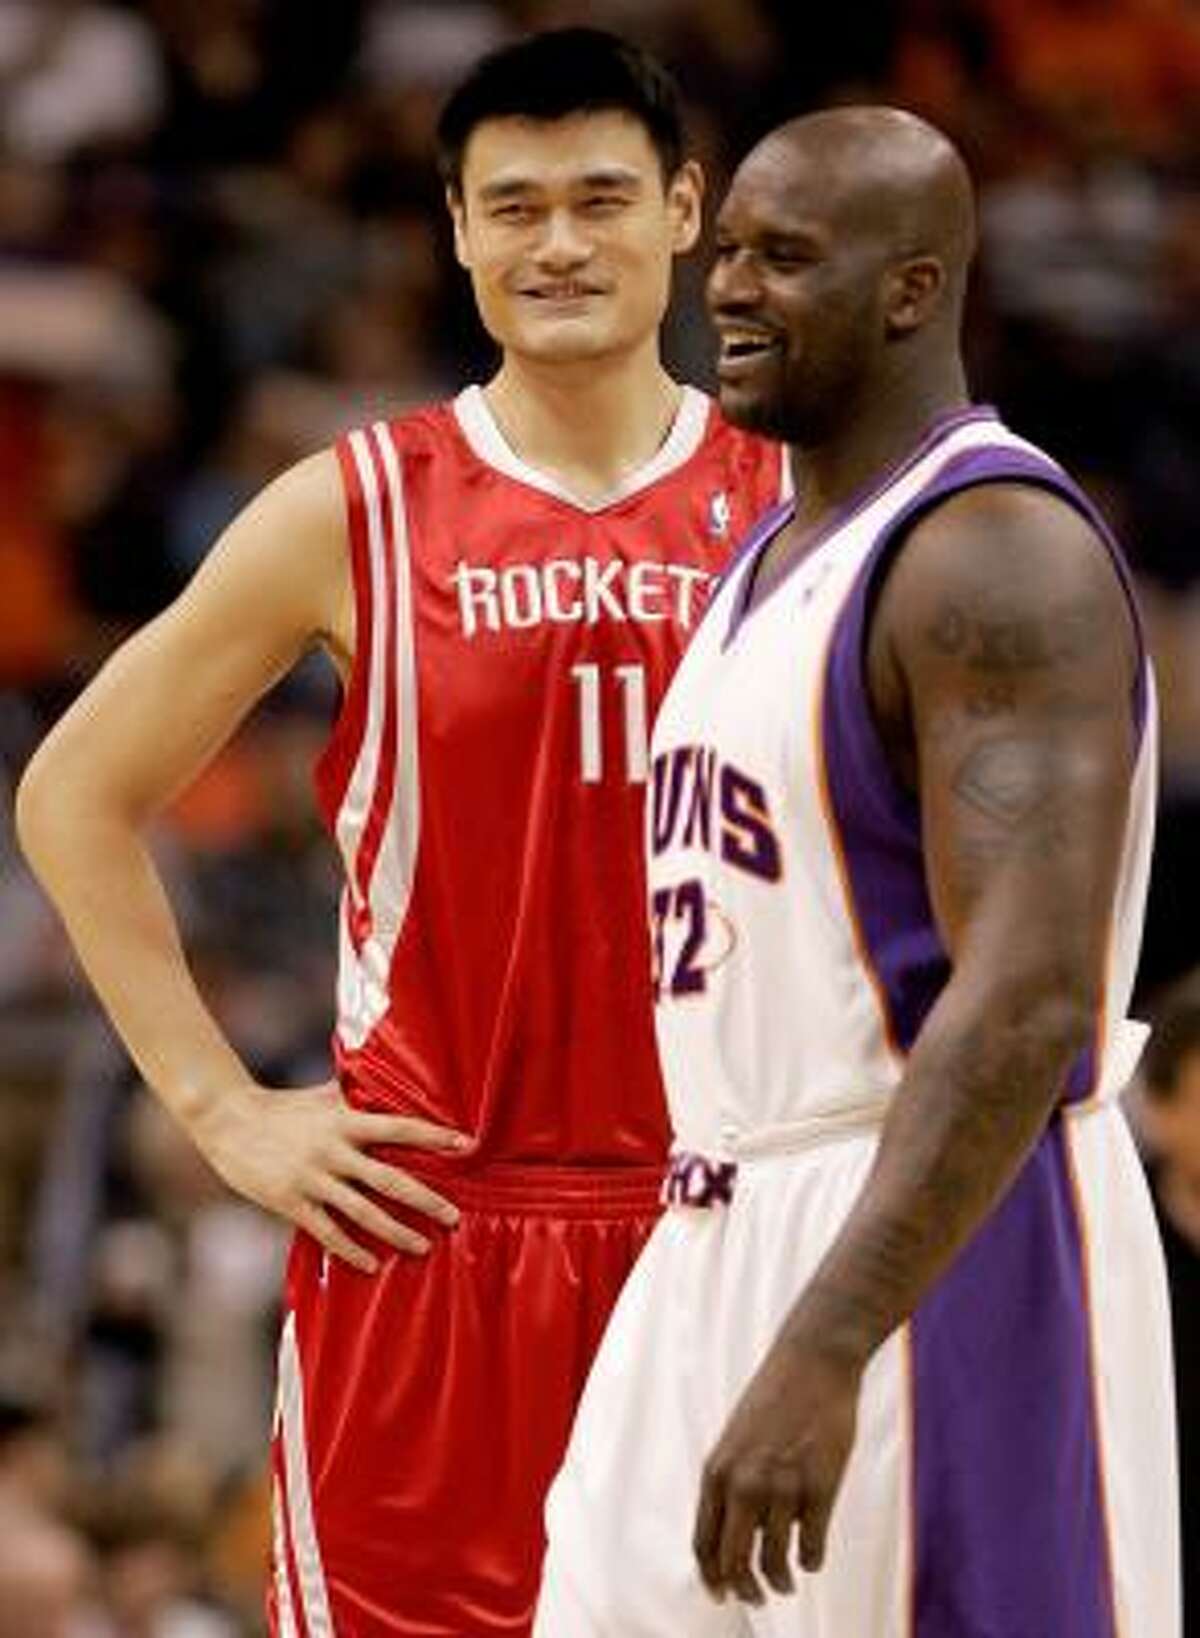 Rockets center Yao Ming (11) is looking forward to a "straight-up" matchup against Phoenix Suns center Shaquille O'Neal (right) in tonight's game at Toyota Center.